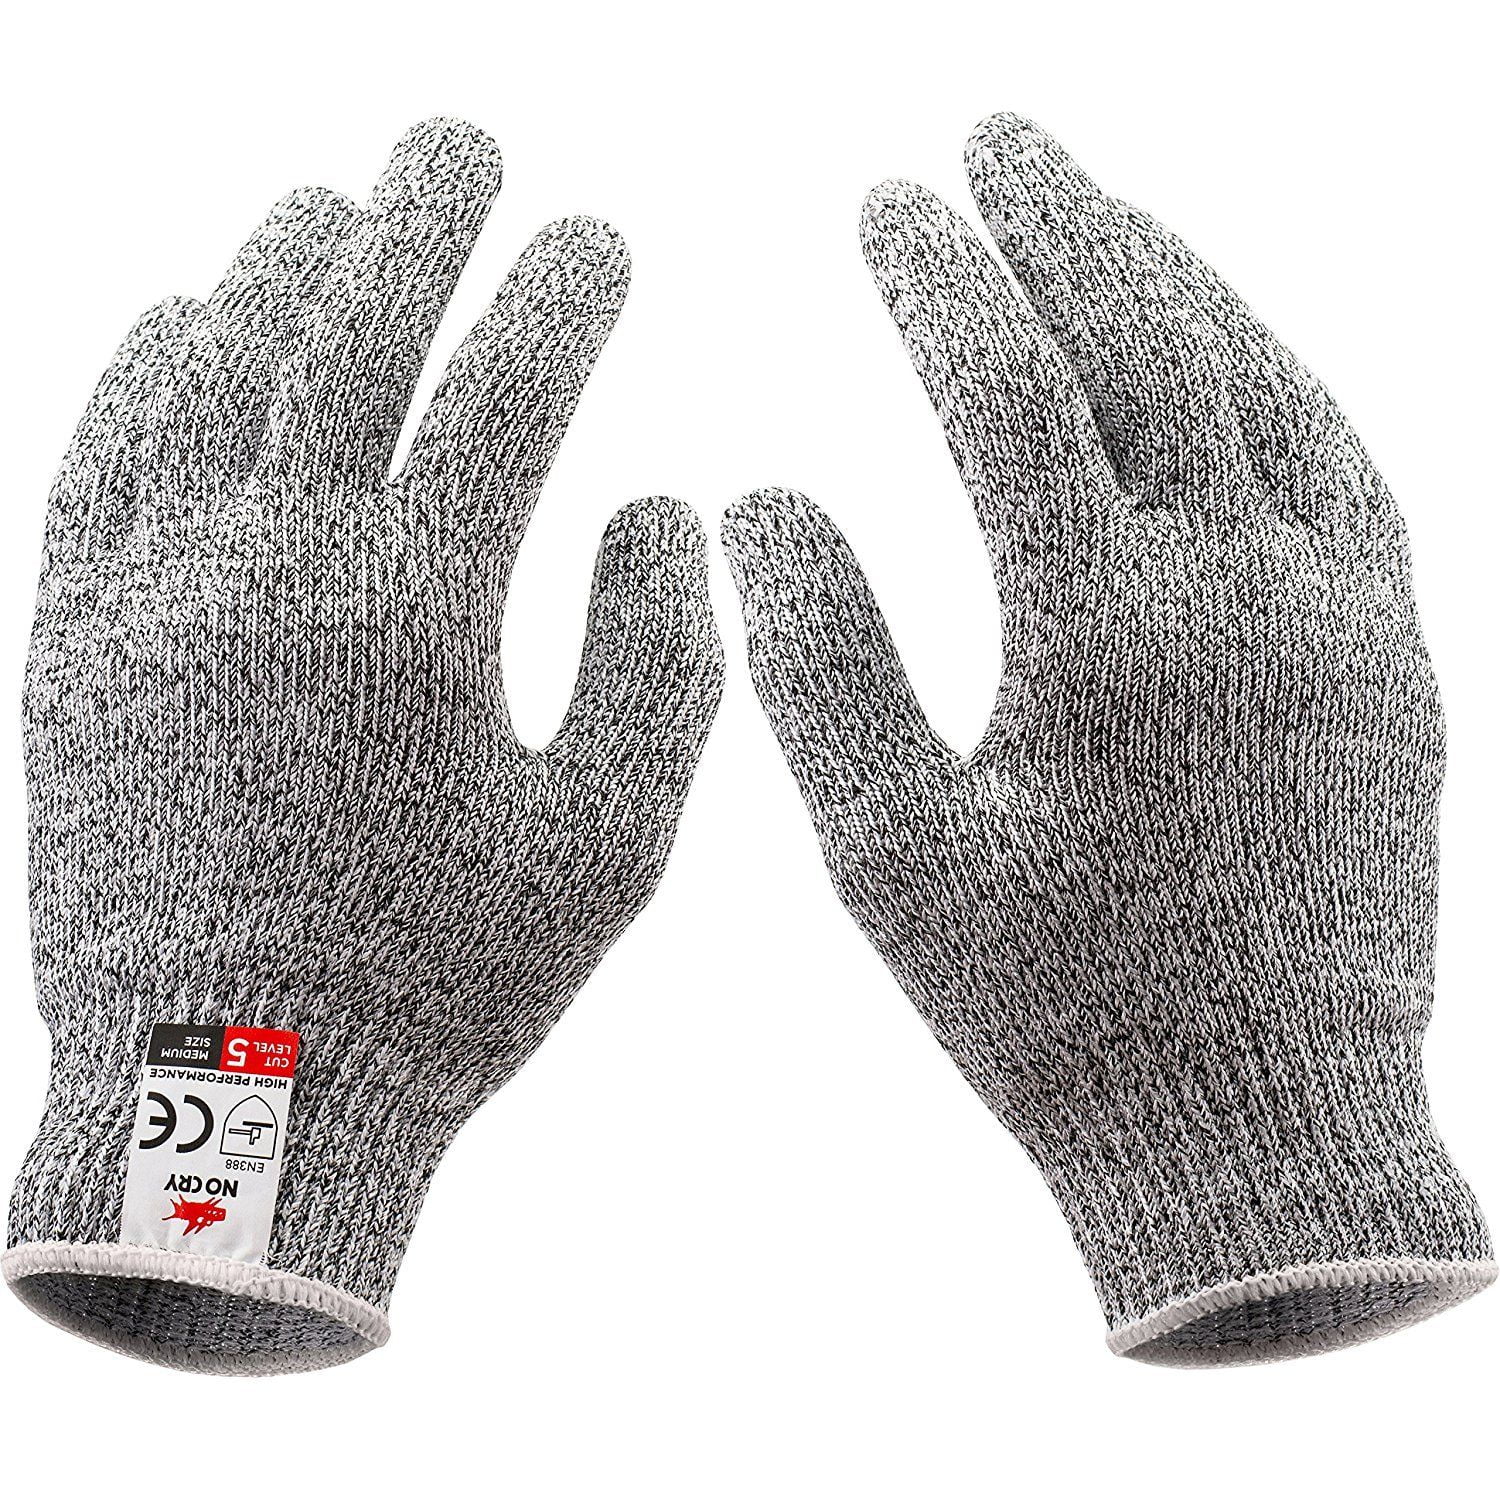 2 NoCry Cut Resistant Gloves High Performance Level 5 Protection Food Grade M XL 